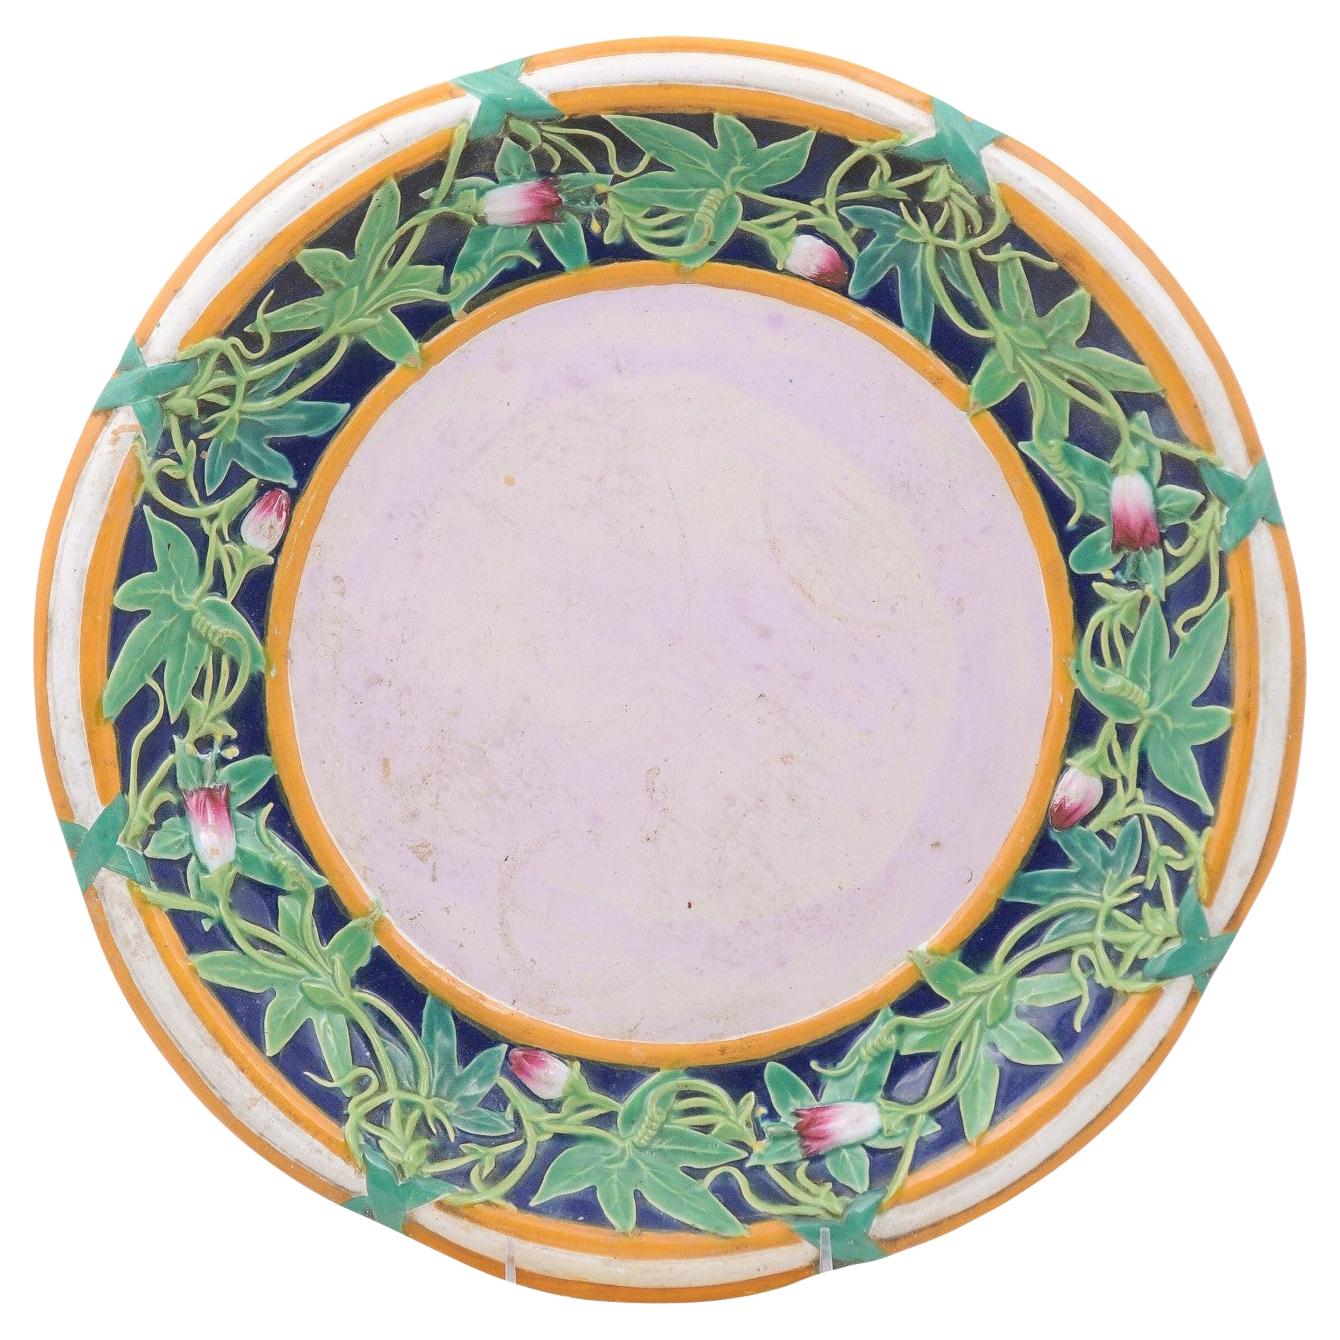 English Mid 19th Century Minton Majolica Platter with Floral Motifs